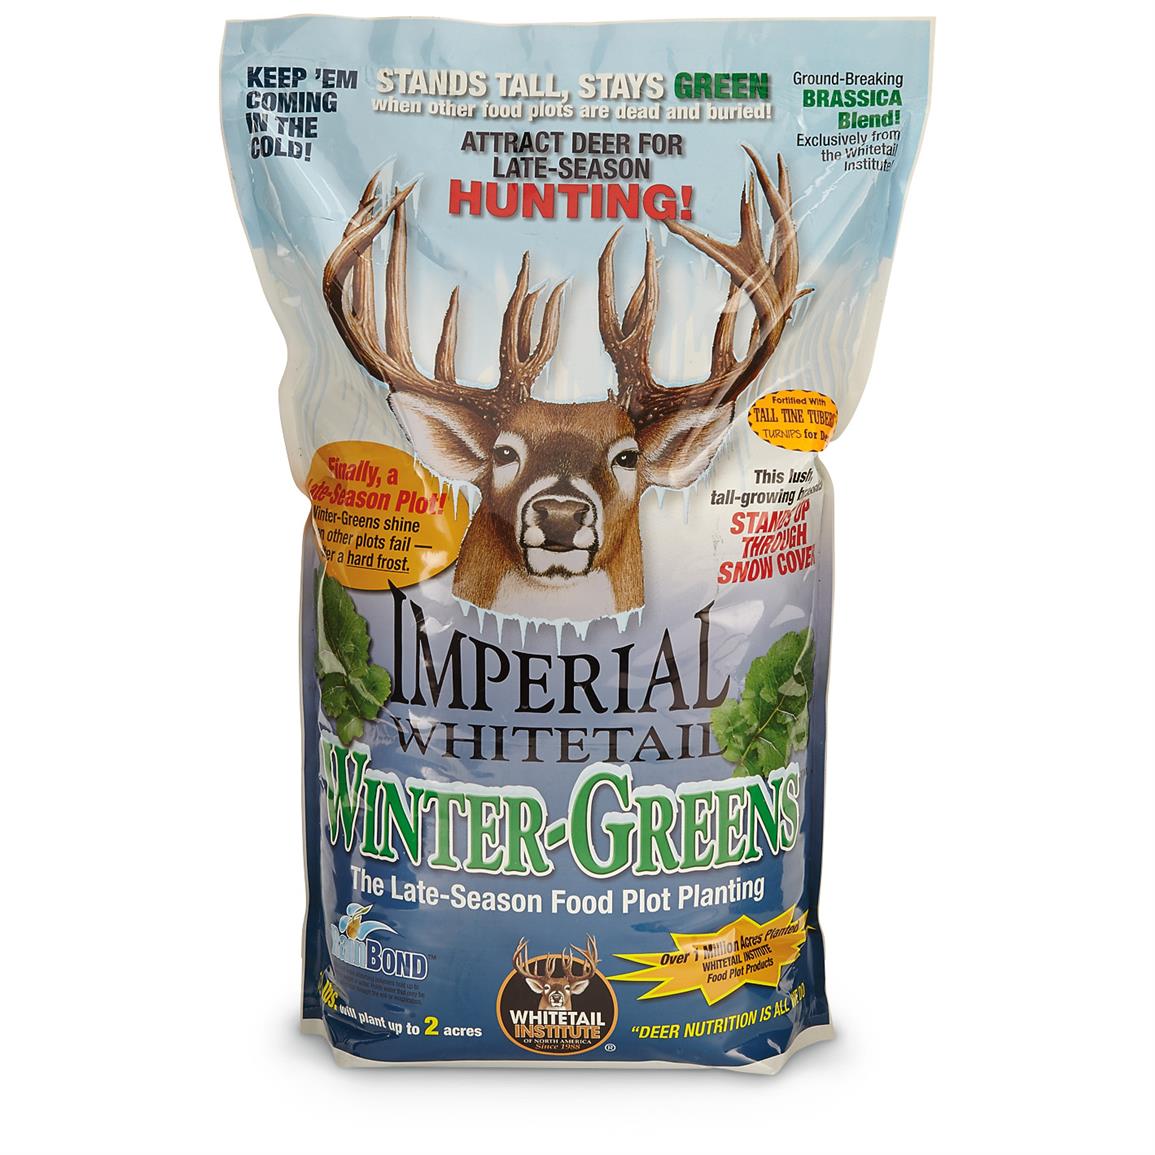 Whitetail Institute Winter-Greens, 12 lbs.